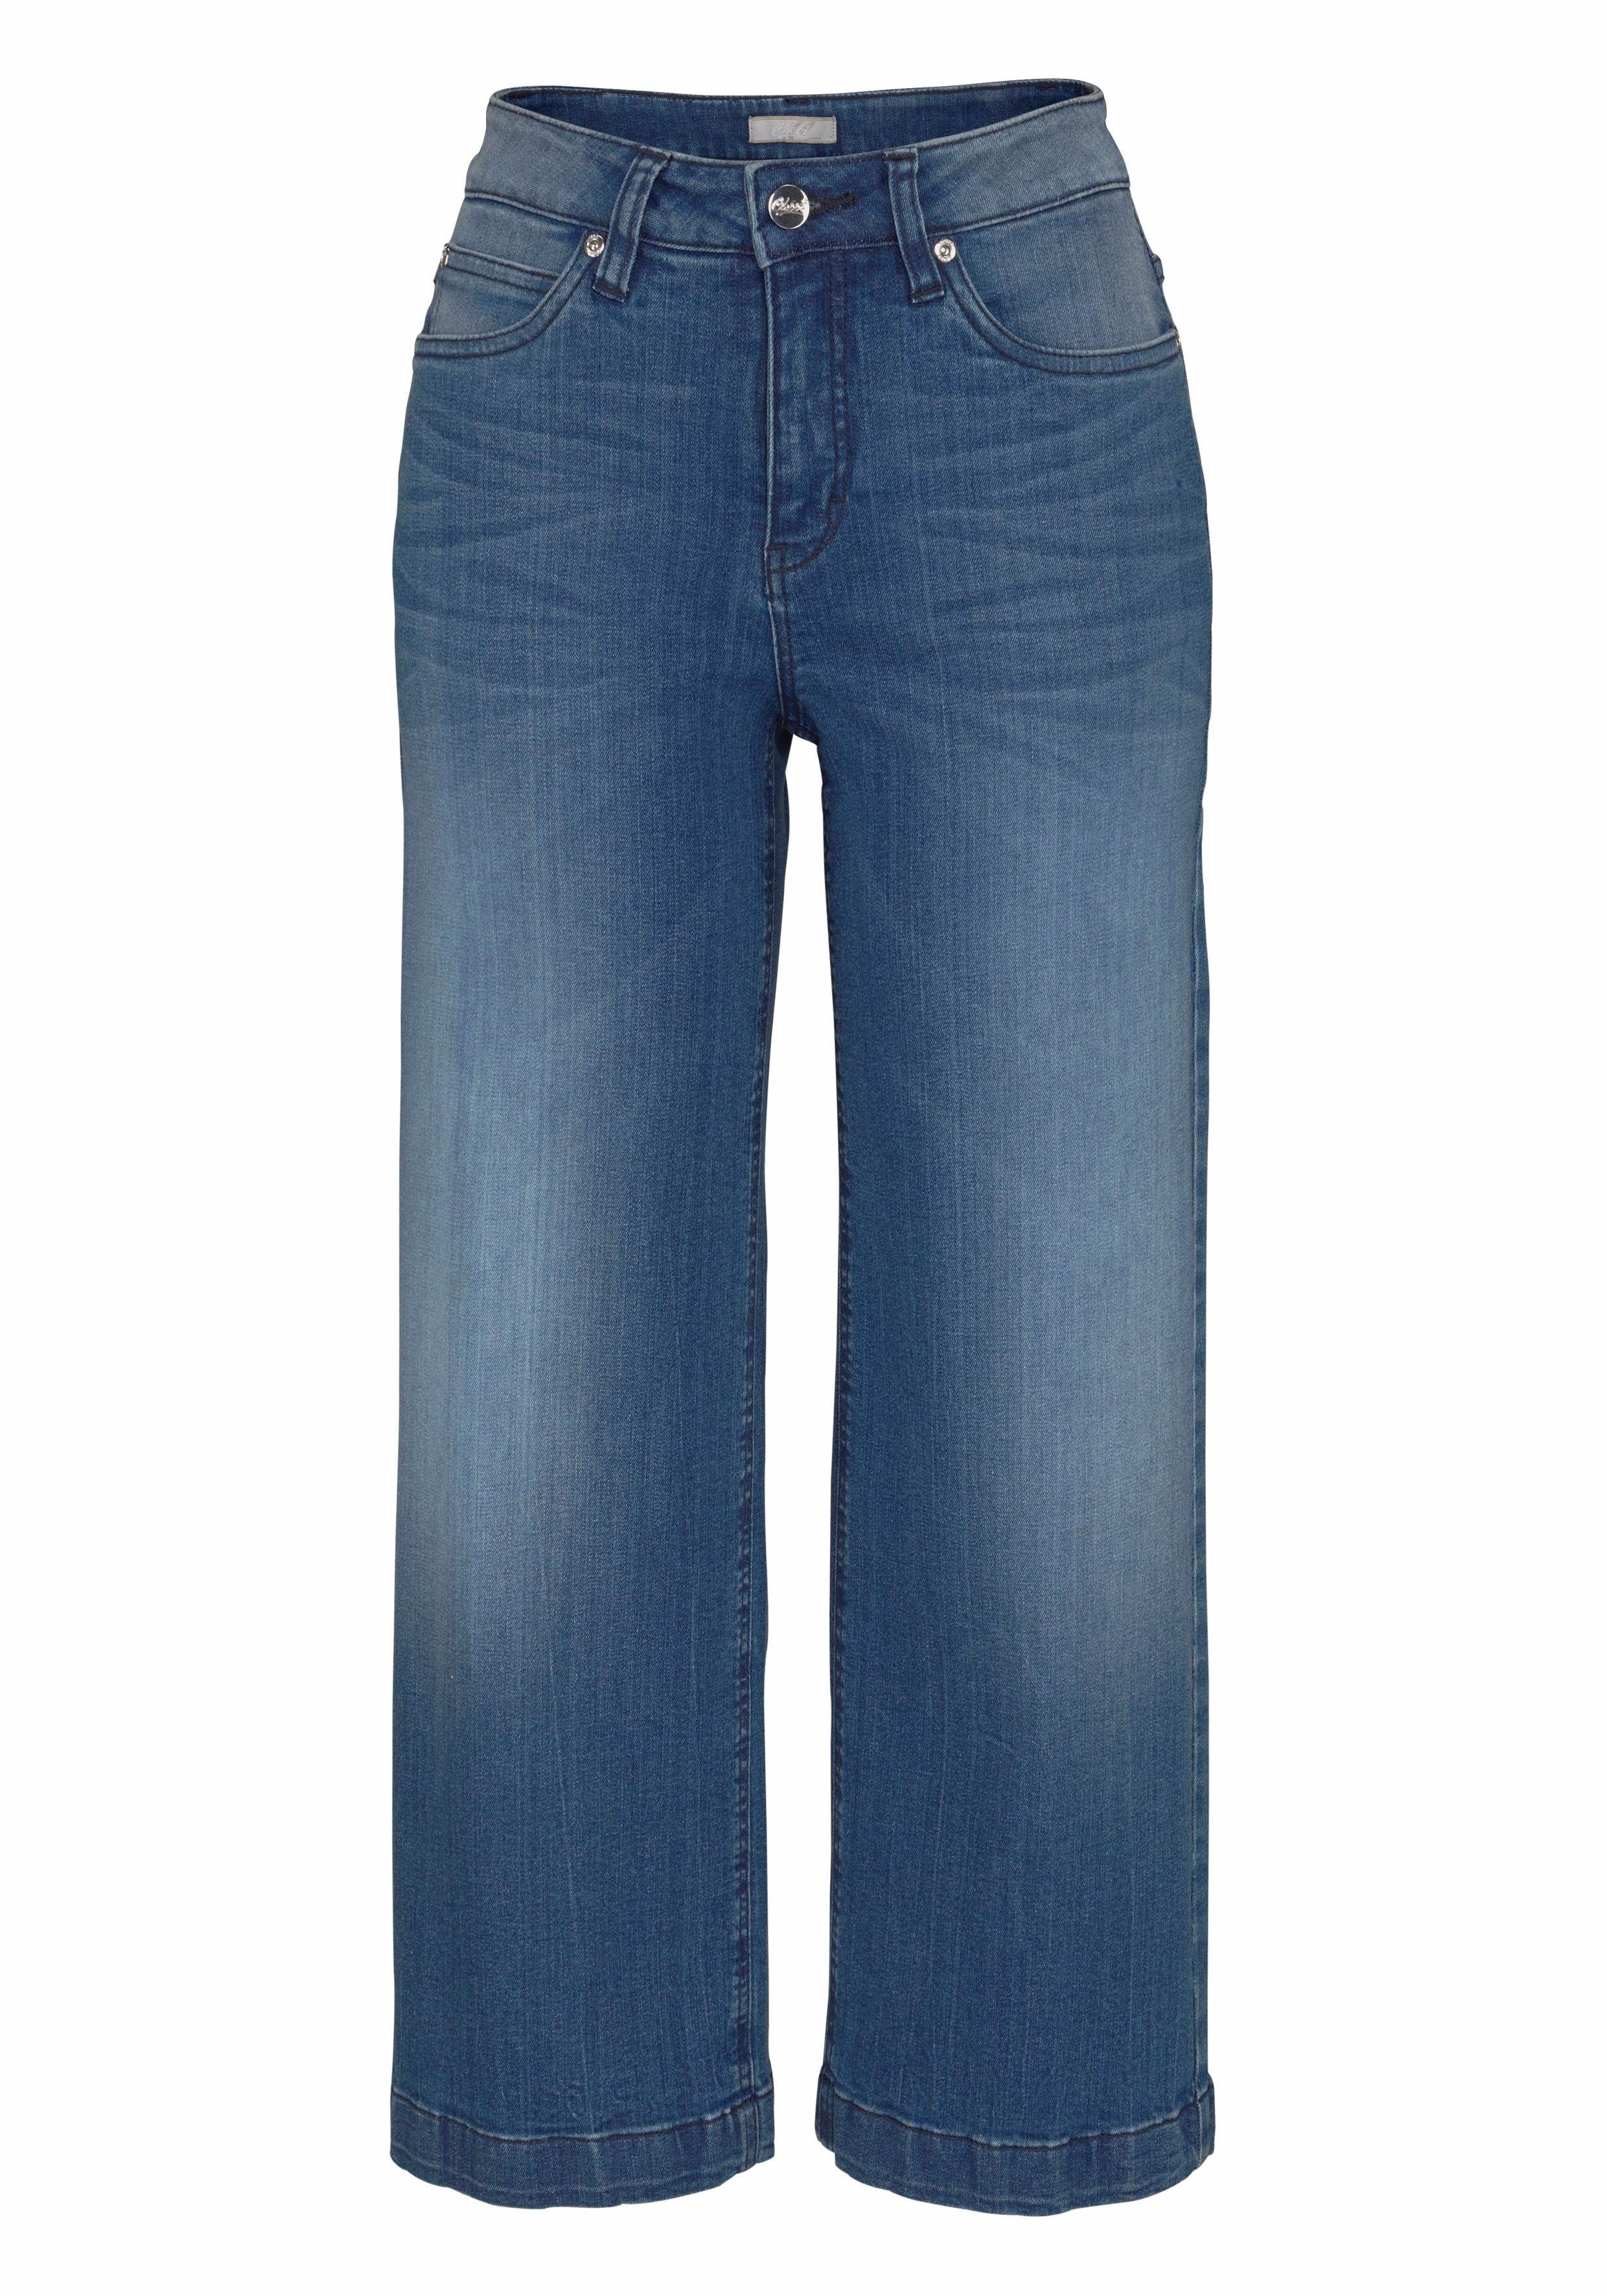 CASUAL Used-Waschung in Aniston 7/8-Jeans blue